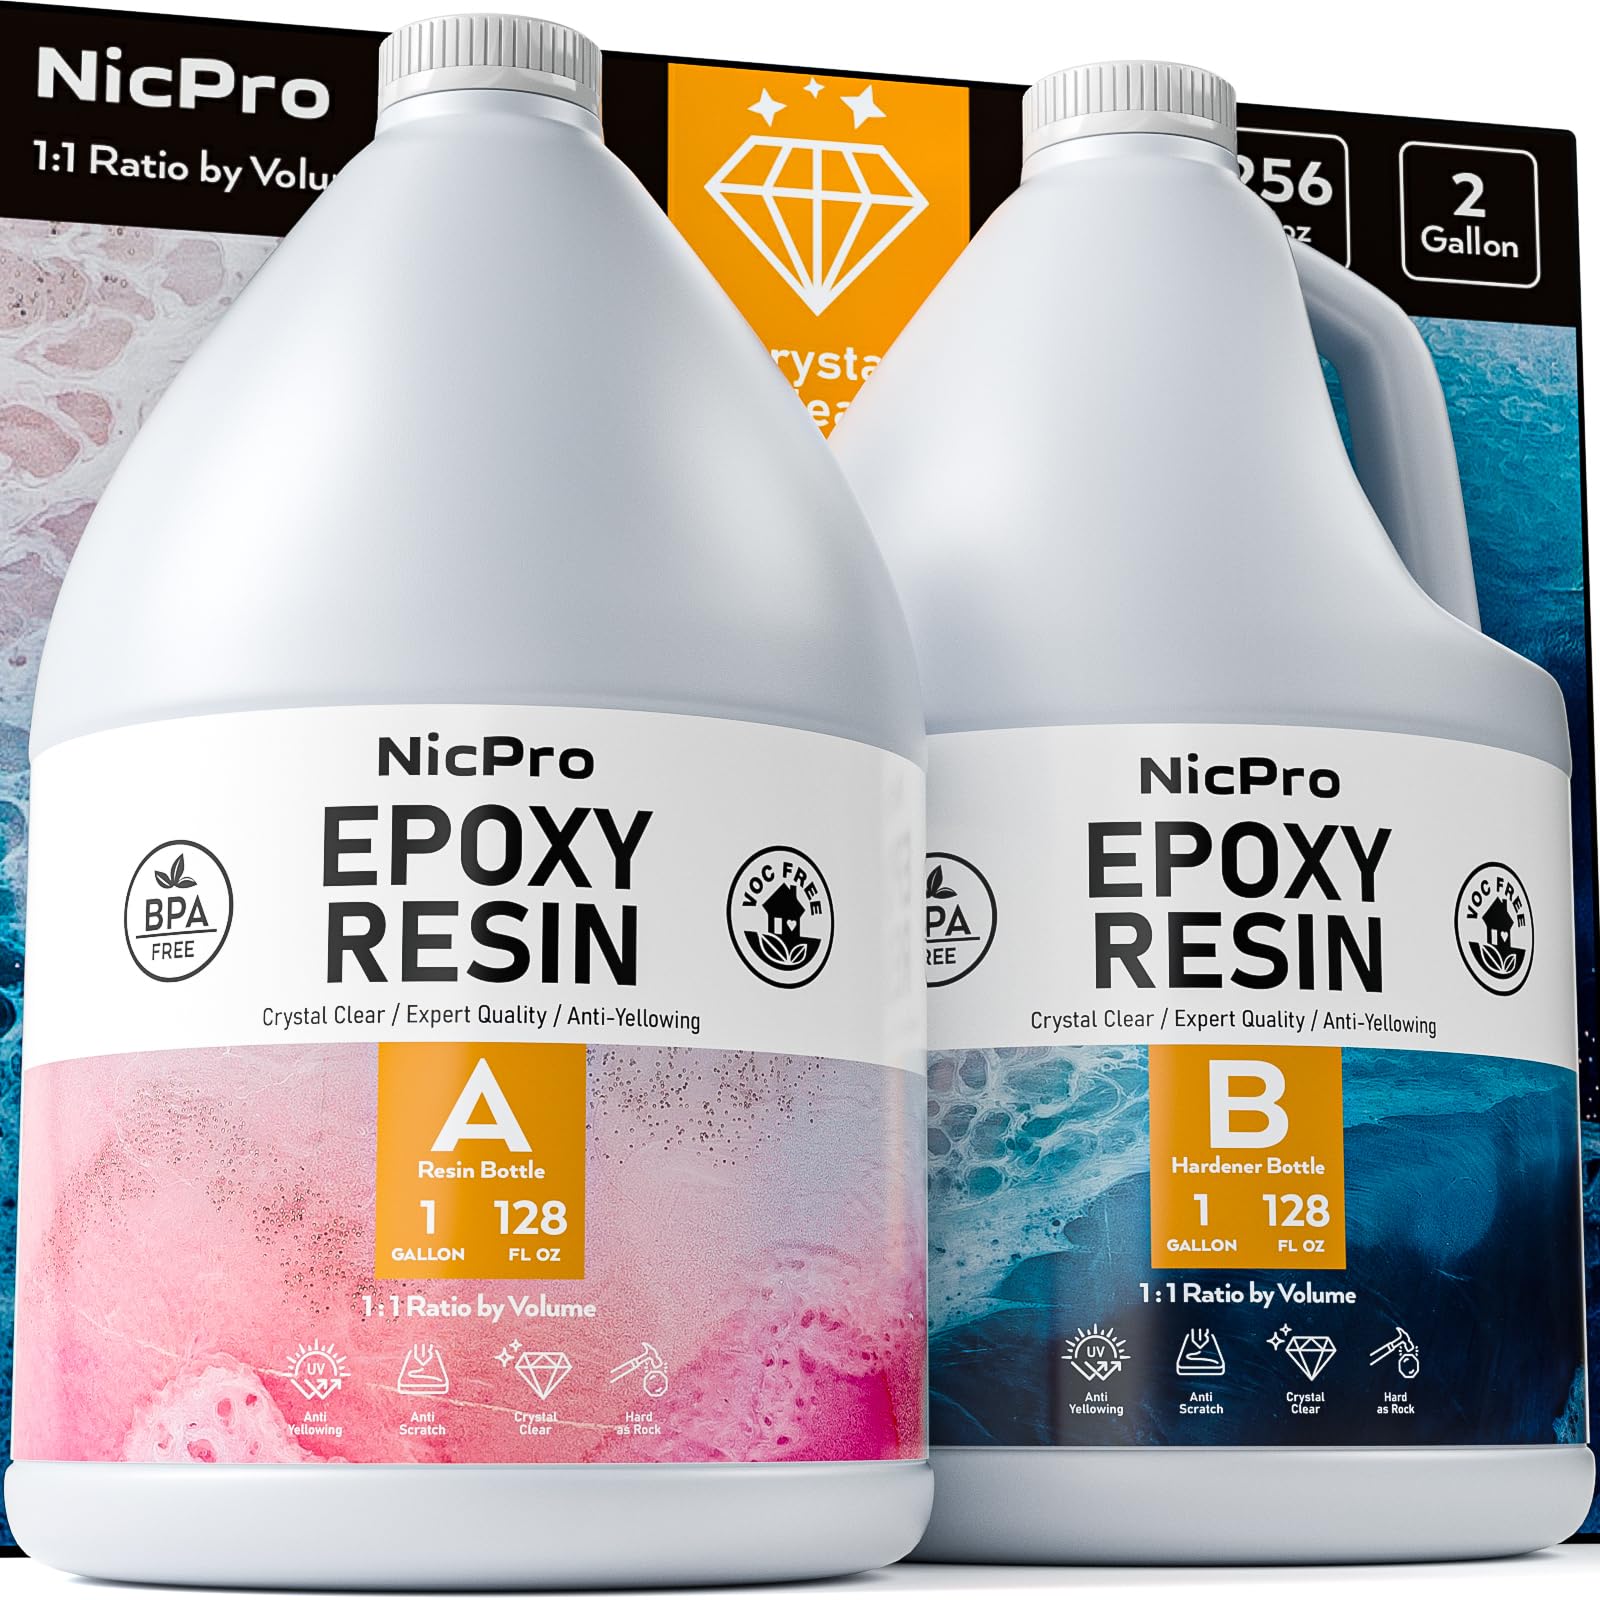 OcePor Epoxy Resin-1 Gallon, Crystal Clear Epoxy Resin Kit, No Yellowing No Bubble Art Resin Casting Resin for Art Crafts, Jewelry Making, Wood & Resi